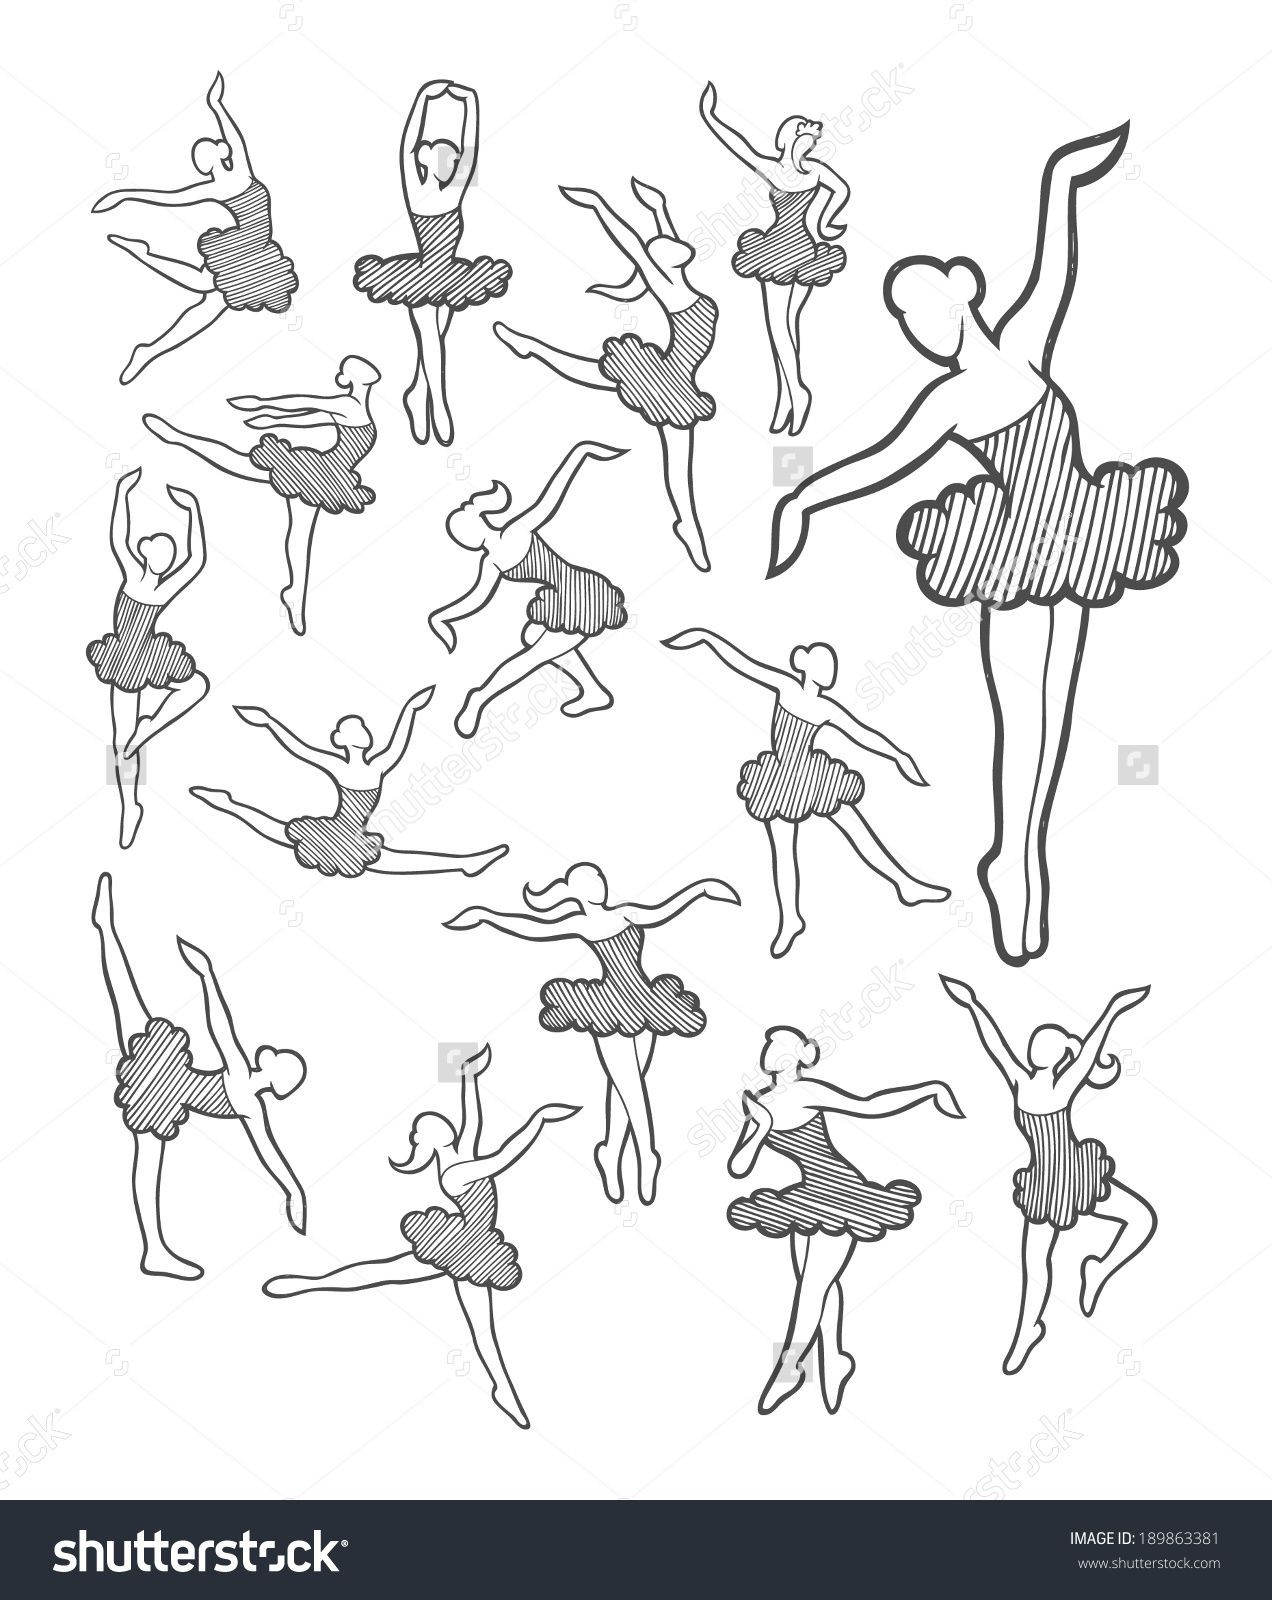 how to draw a dancer step by step